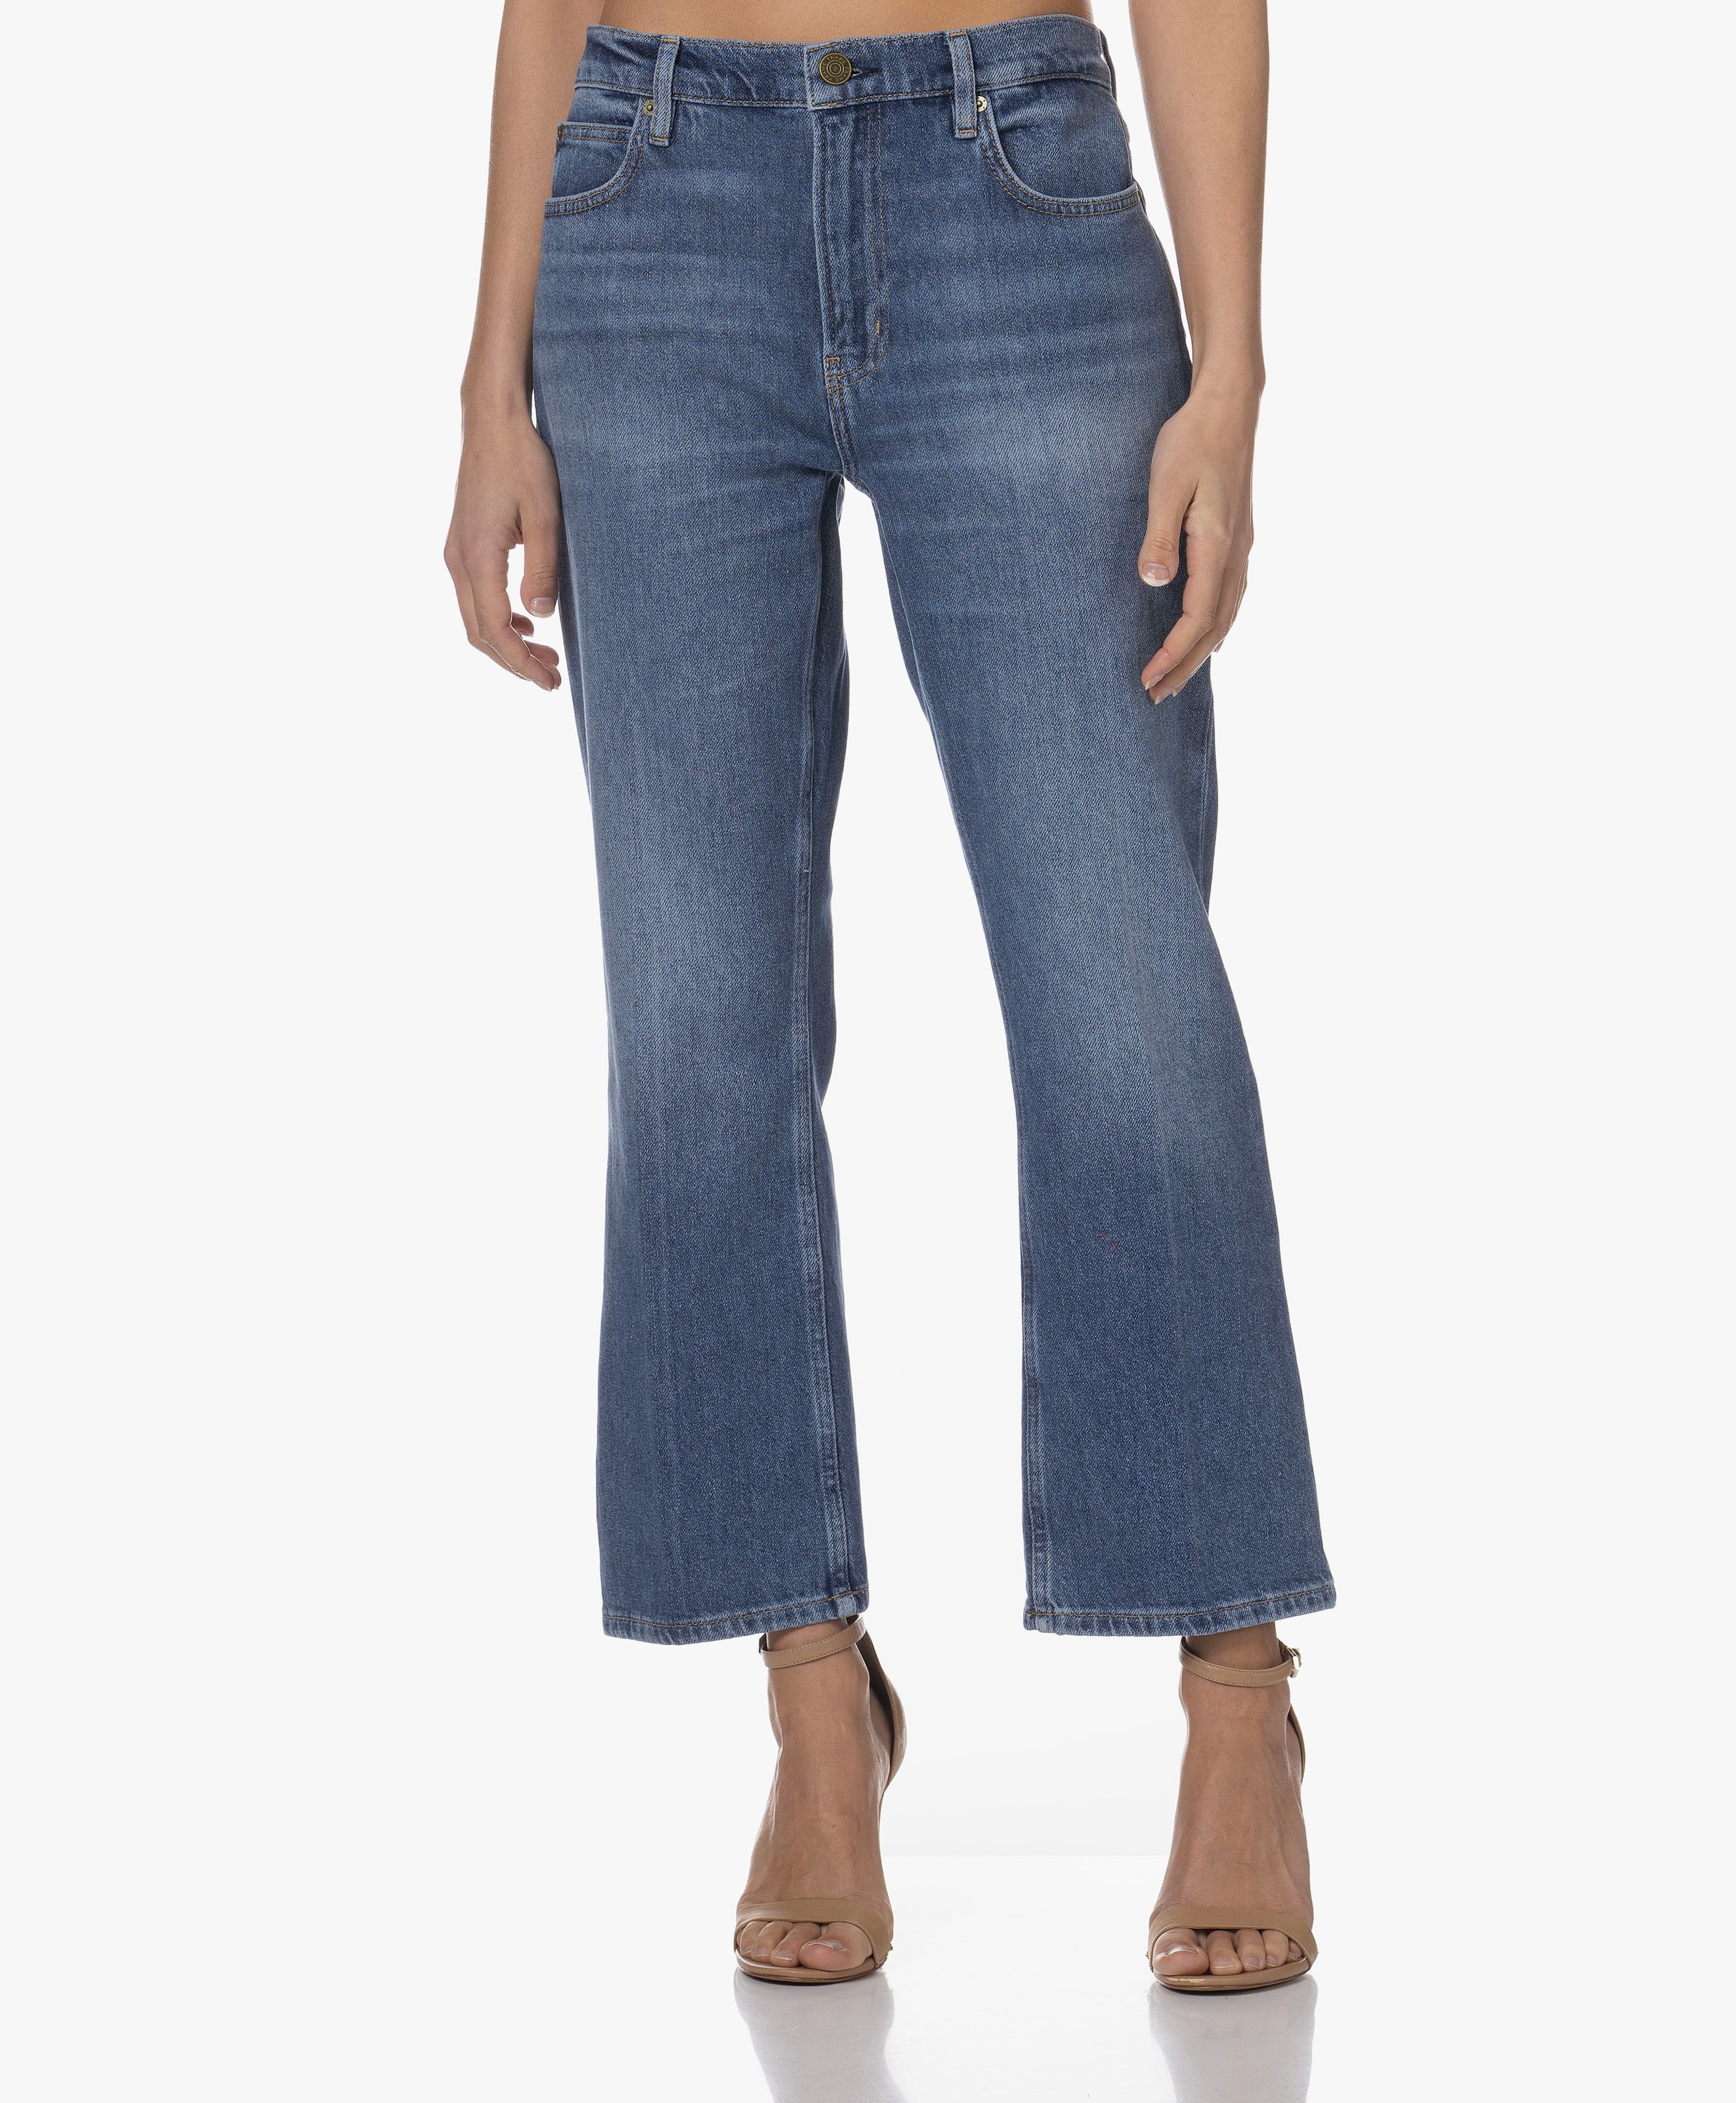 The 70's Crop Mini Boot Jeans